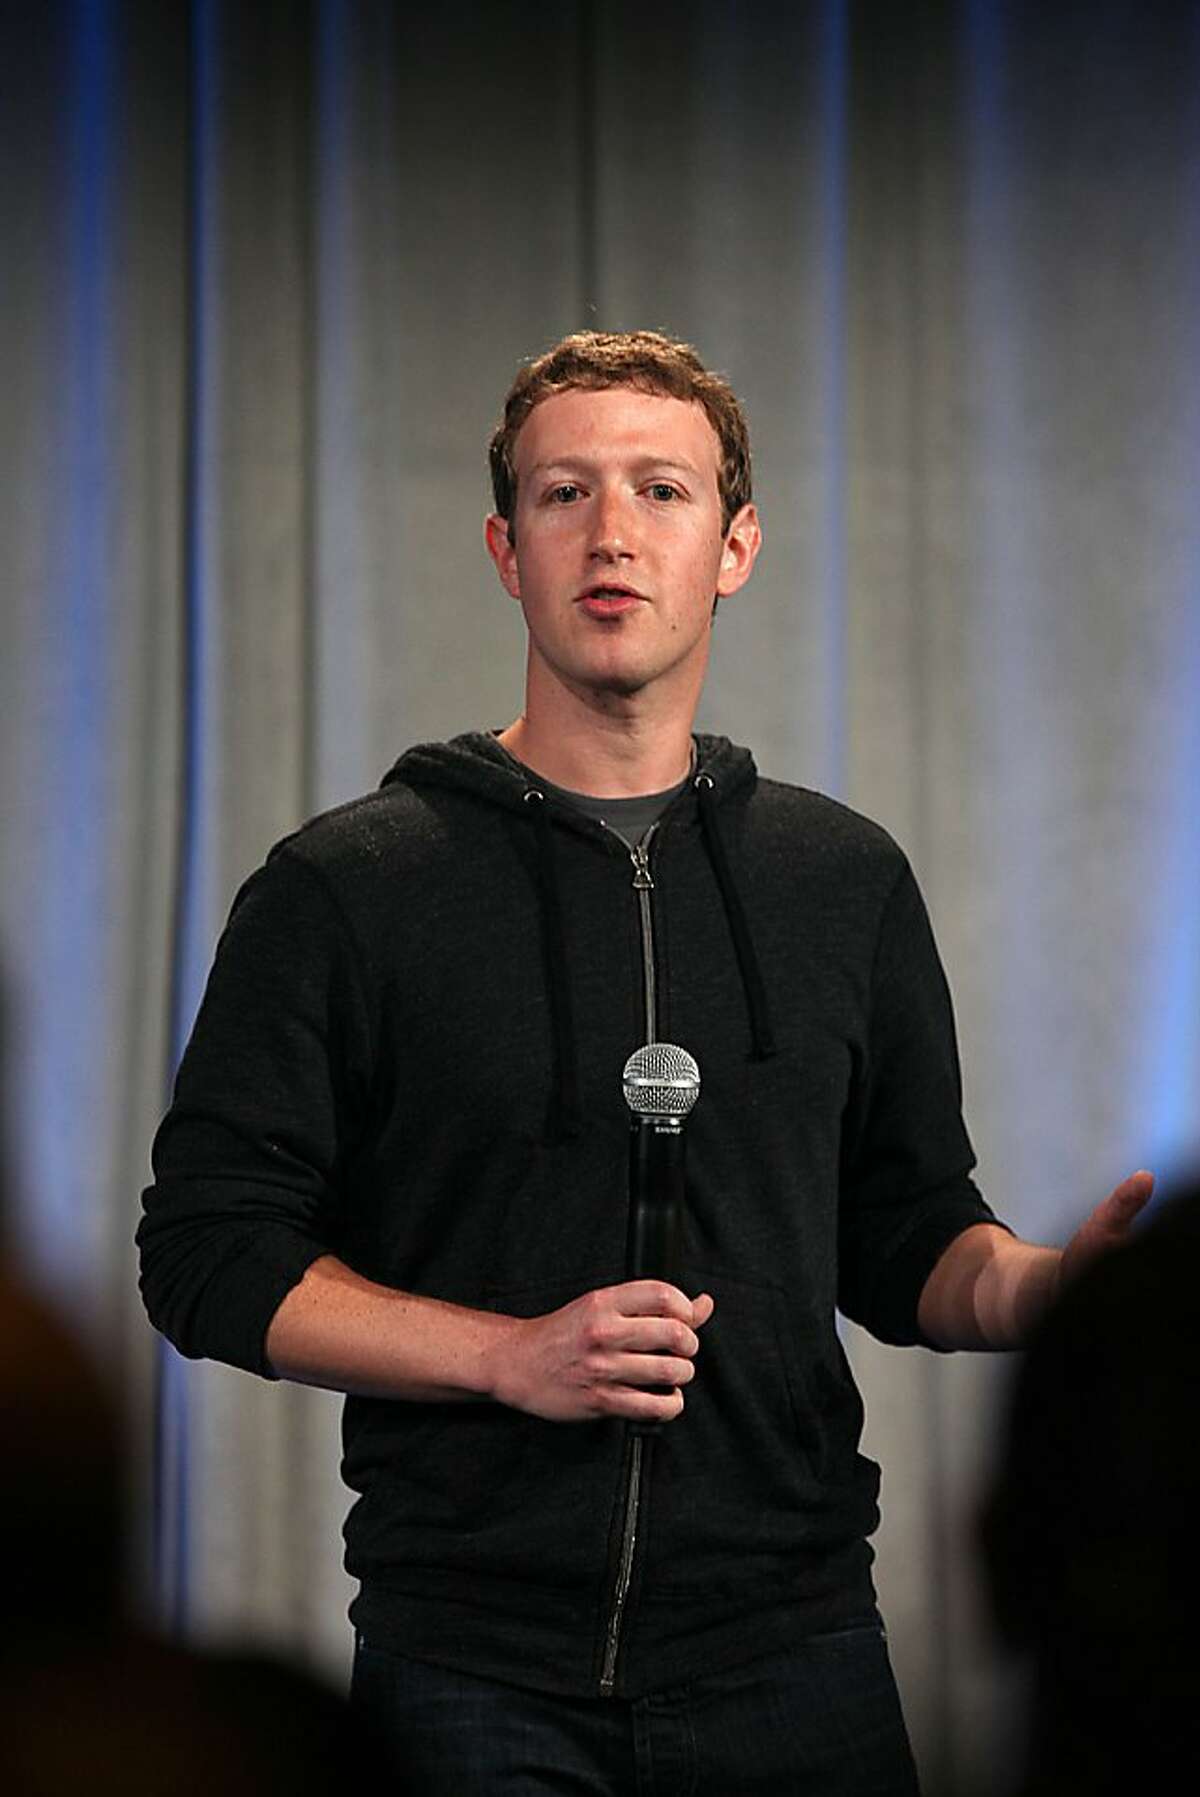 Chairman and chief executive Mark Zuckerberg at Facebook headquarters in Menlo Park, California, introduces a new software called Home to showcase Facebook using Google's Android operating system on Thursday, April 4, 2013. The first phone with the new package installed will be made by HTC and will be sold in the United States with AT&T service for about $100, starting April 12.